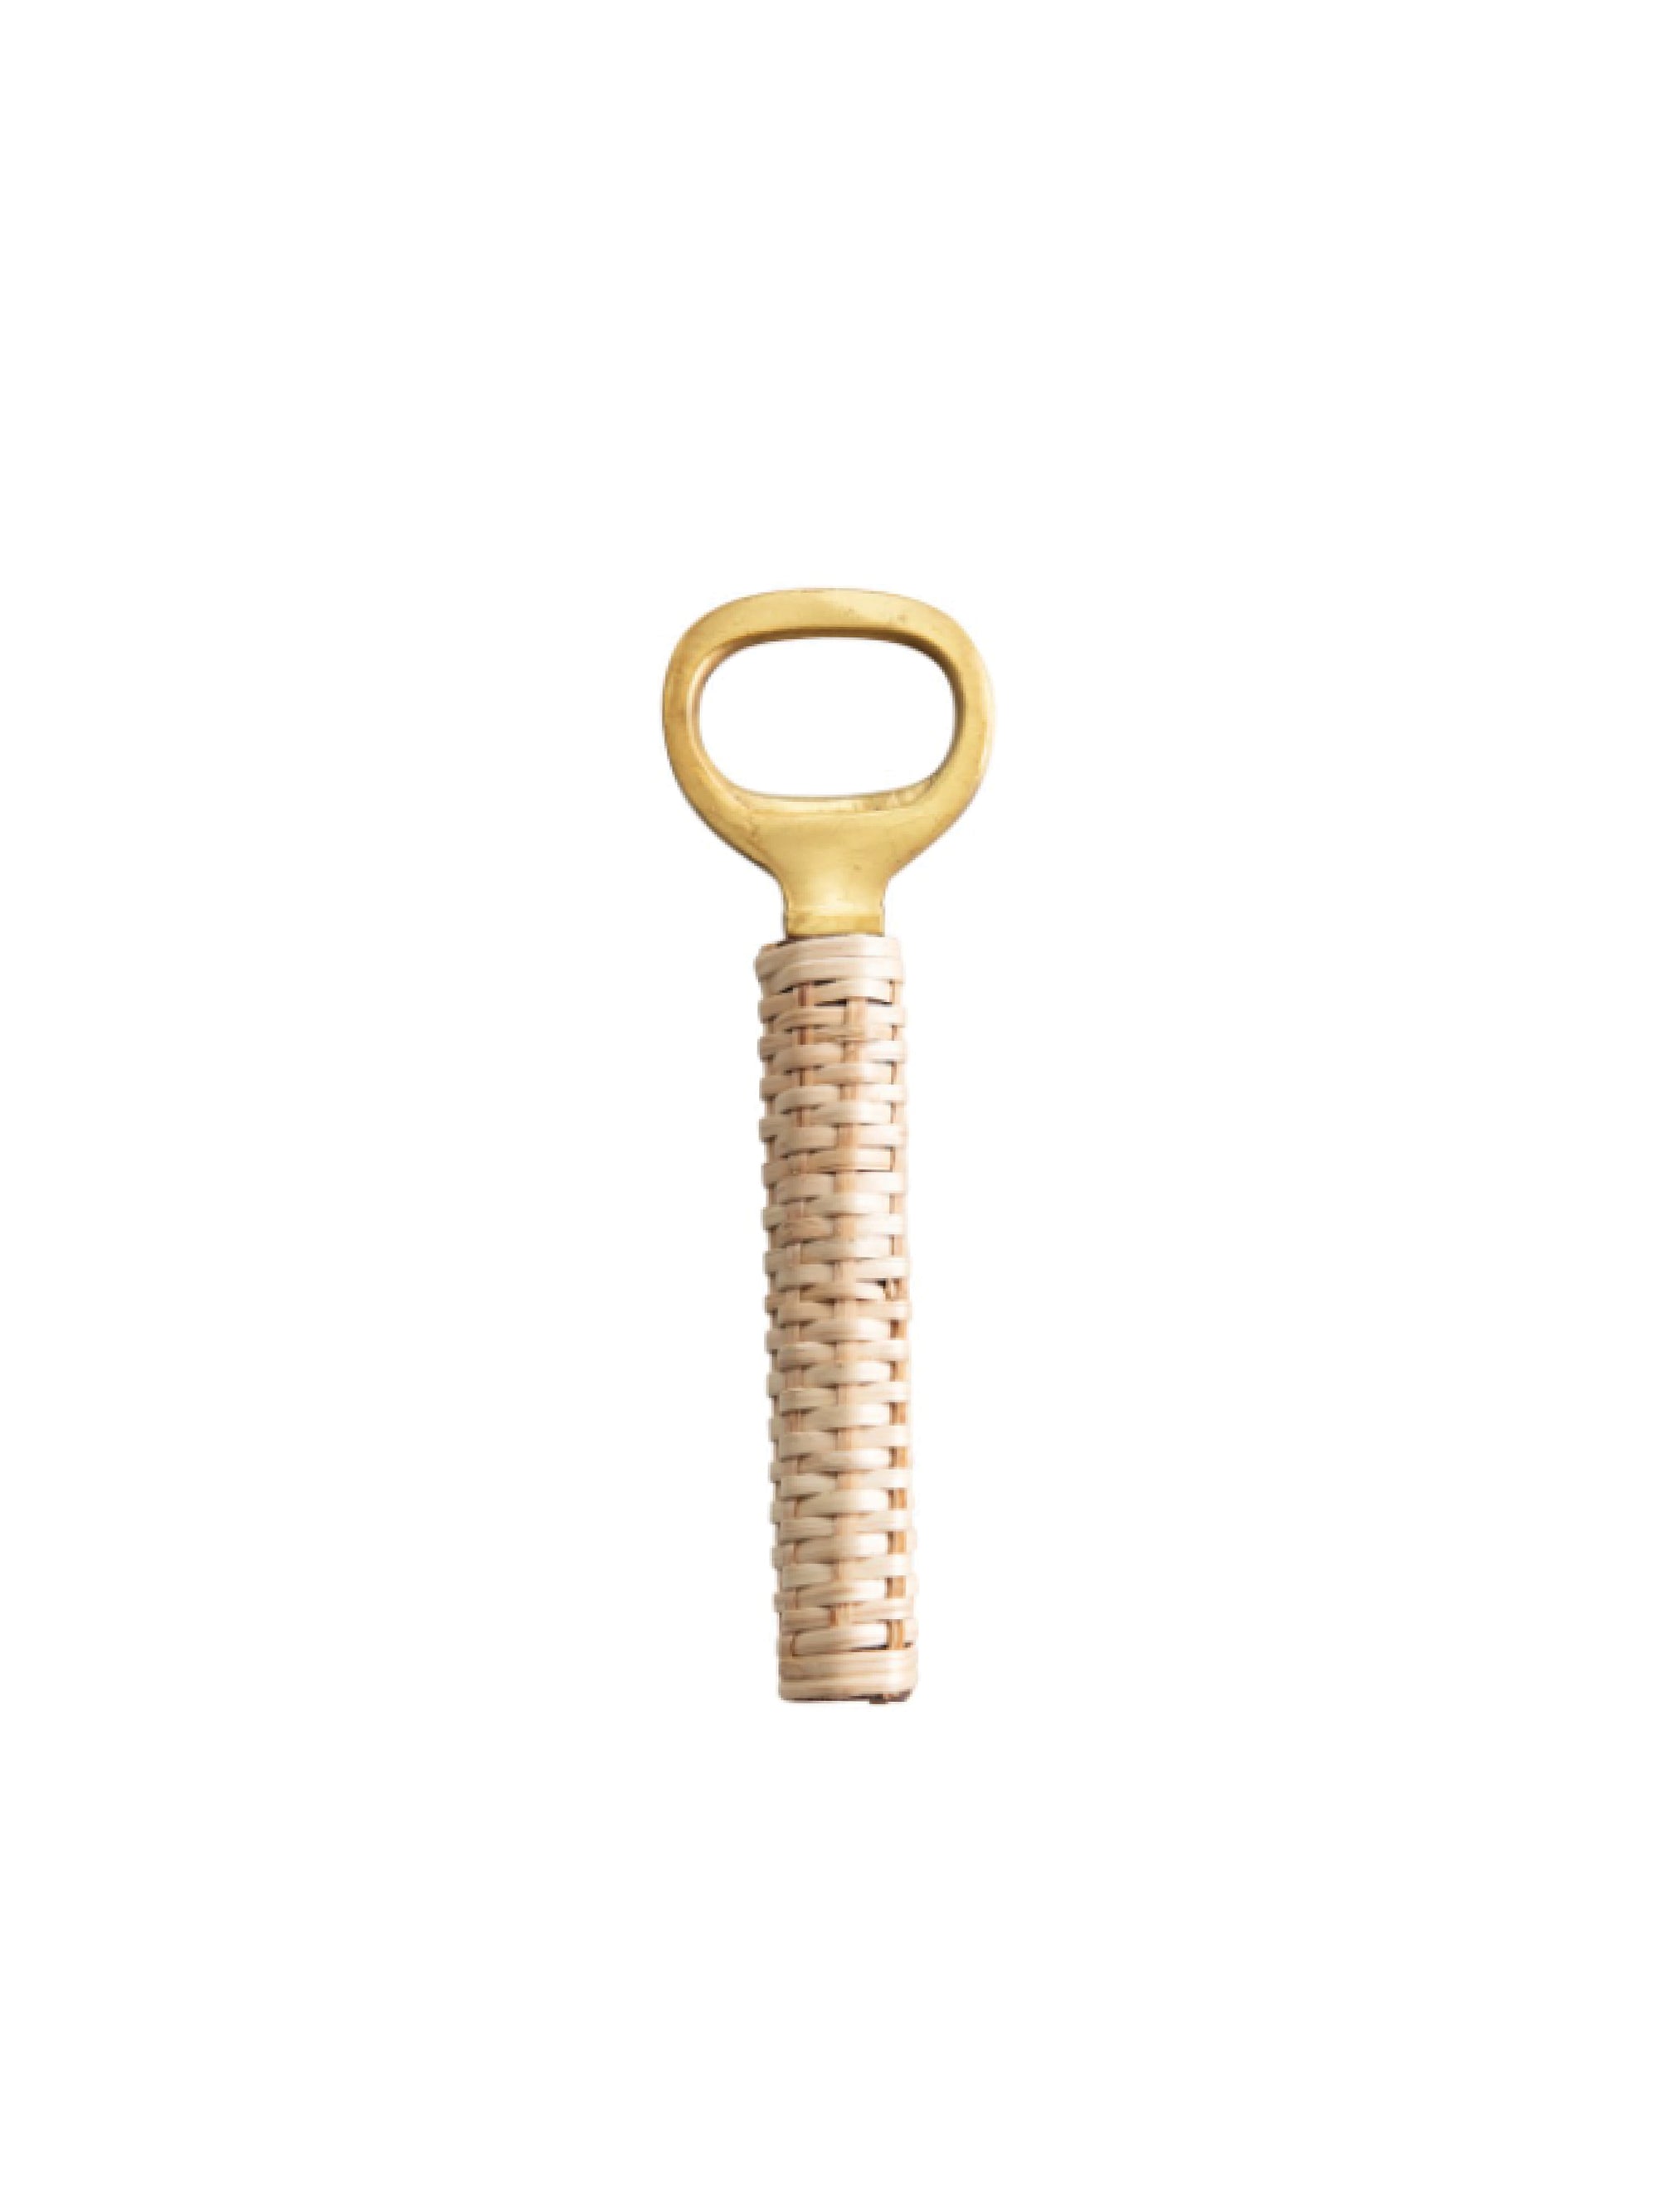 Brass Bottle Opener w/ Bamboo Wrapped Handle